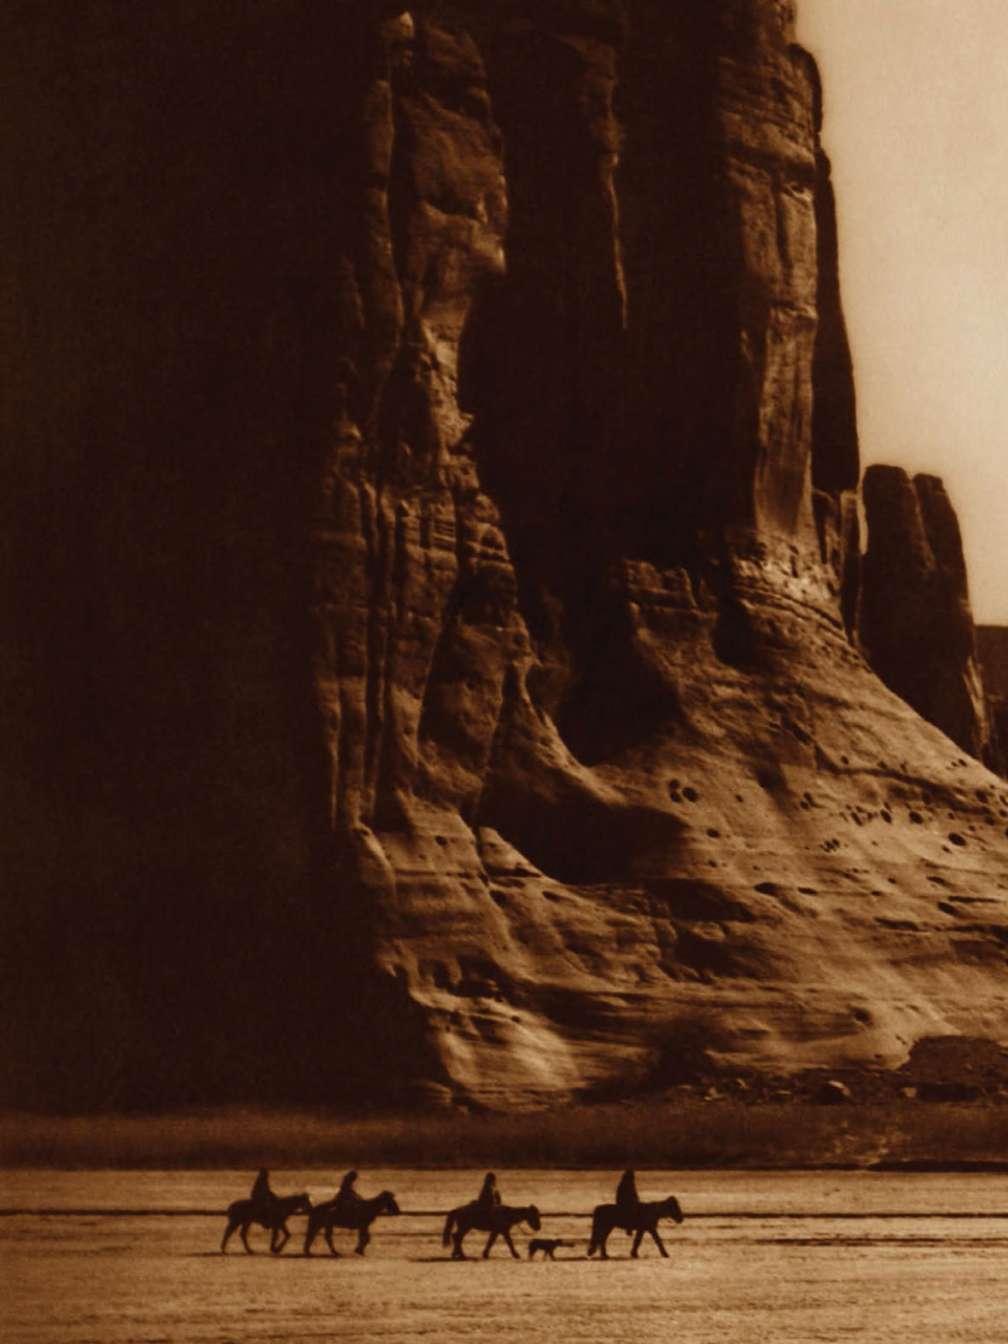 Grinnell and Curtis In 1897 Edward Curtis kept busy photographing Mount Rainier and leading climbing expeditions up the Washington state mountain.